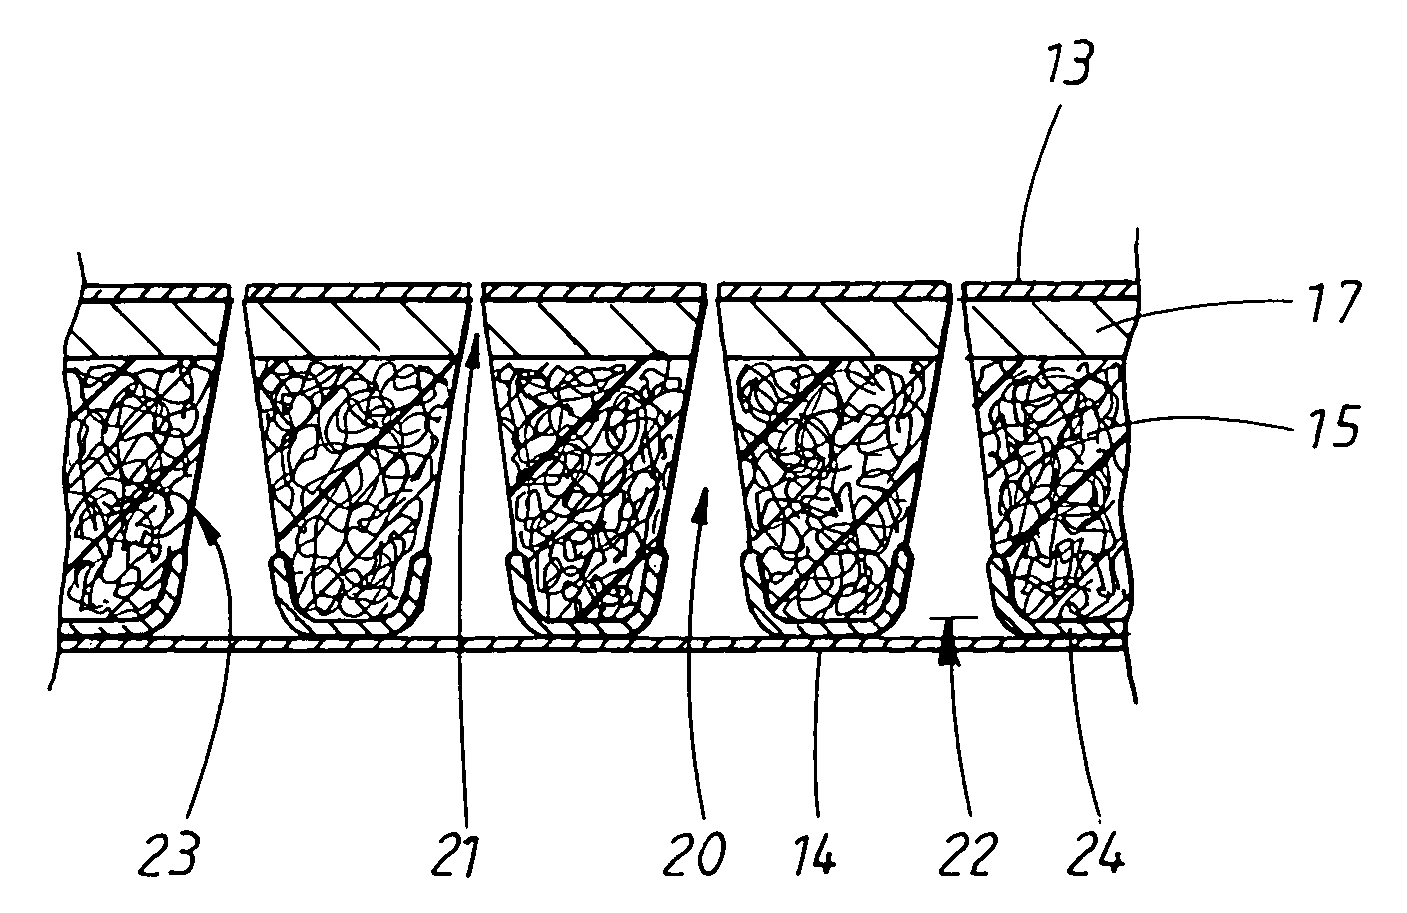 Absorbent article and method of production of an absorbent article